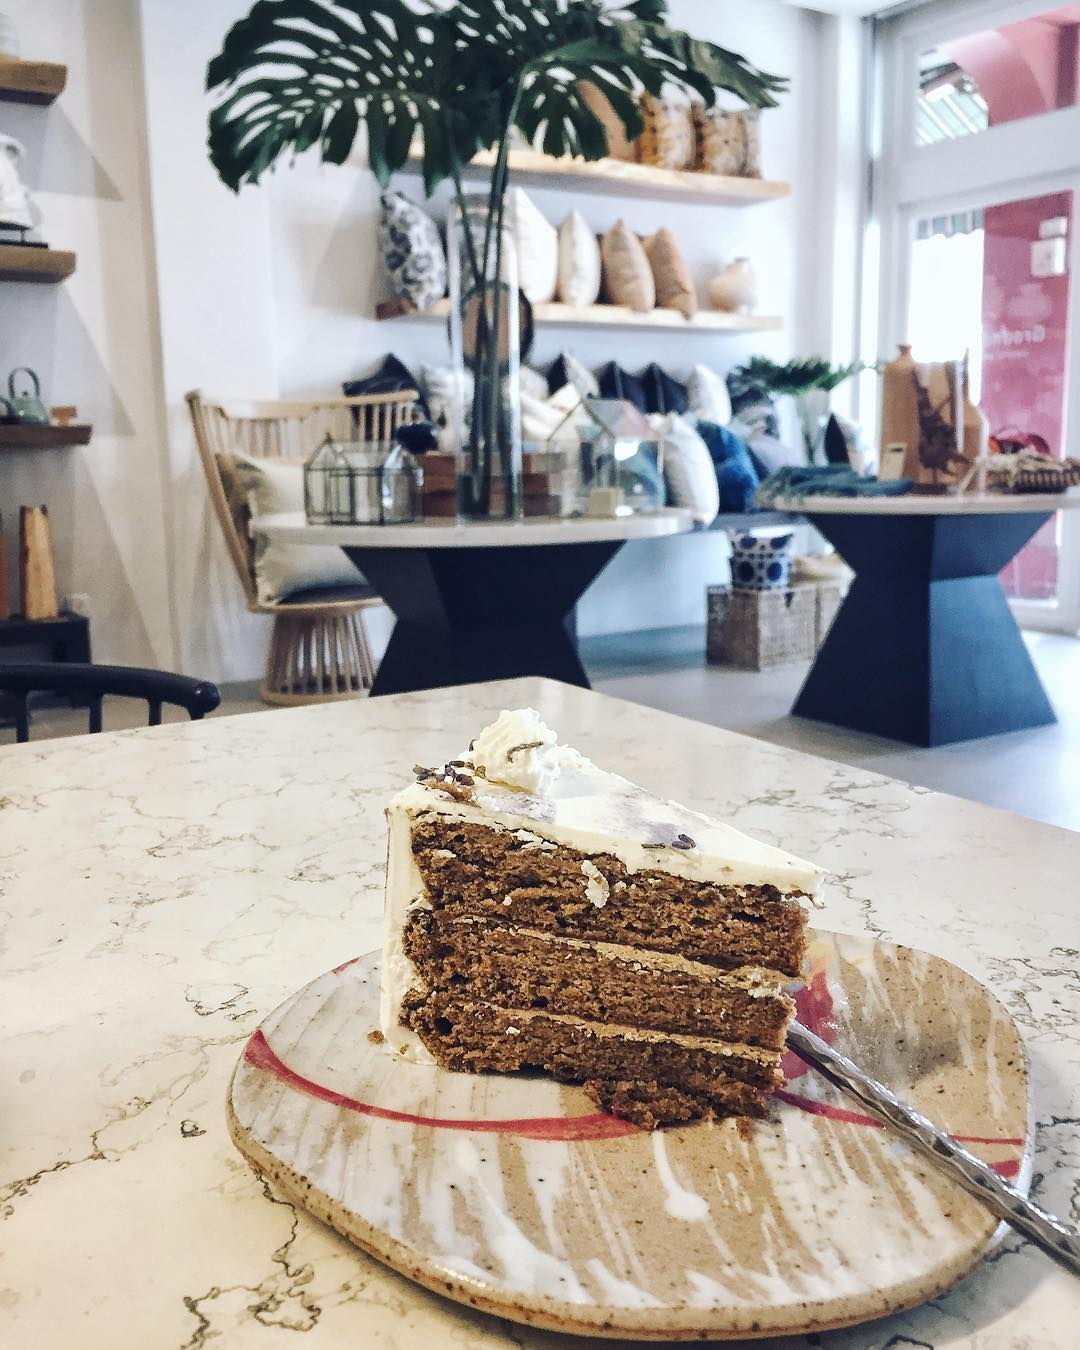 Savour home-baked cakes at Groundstory